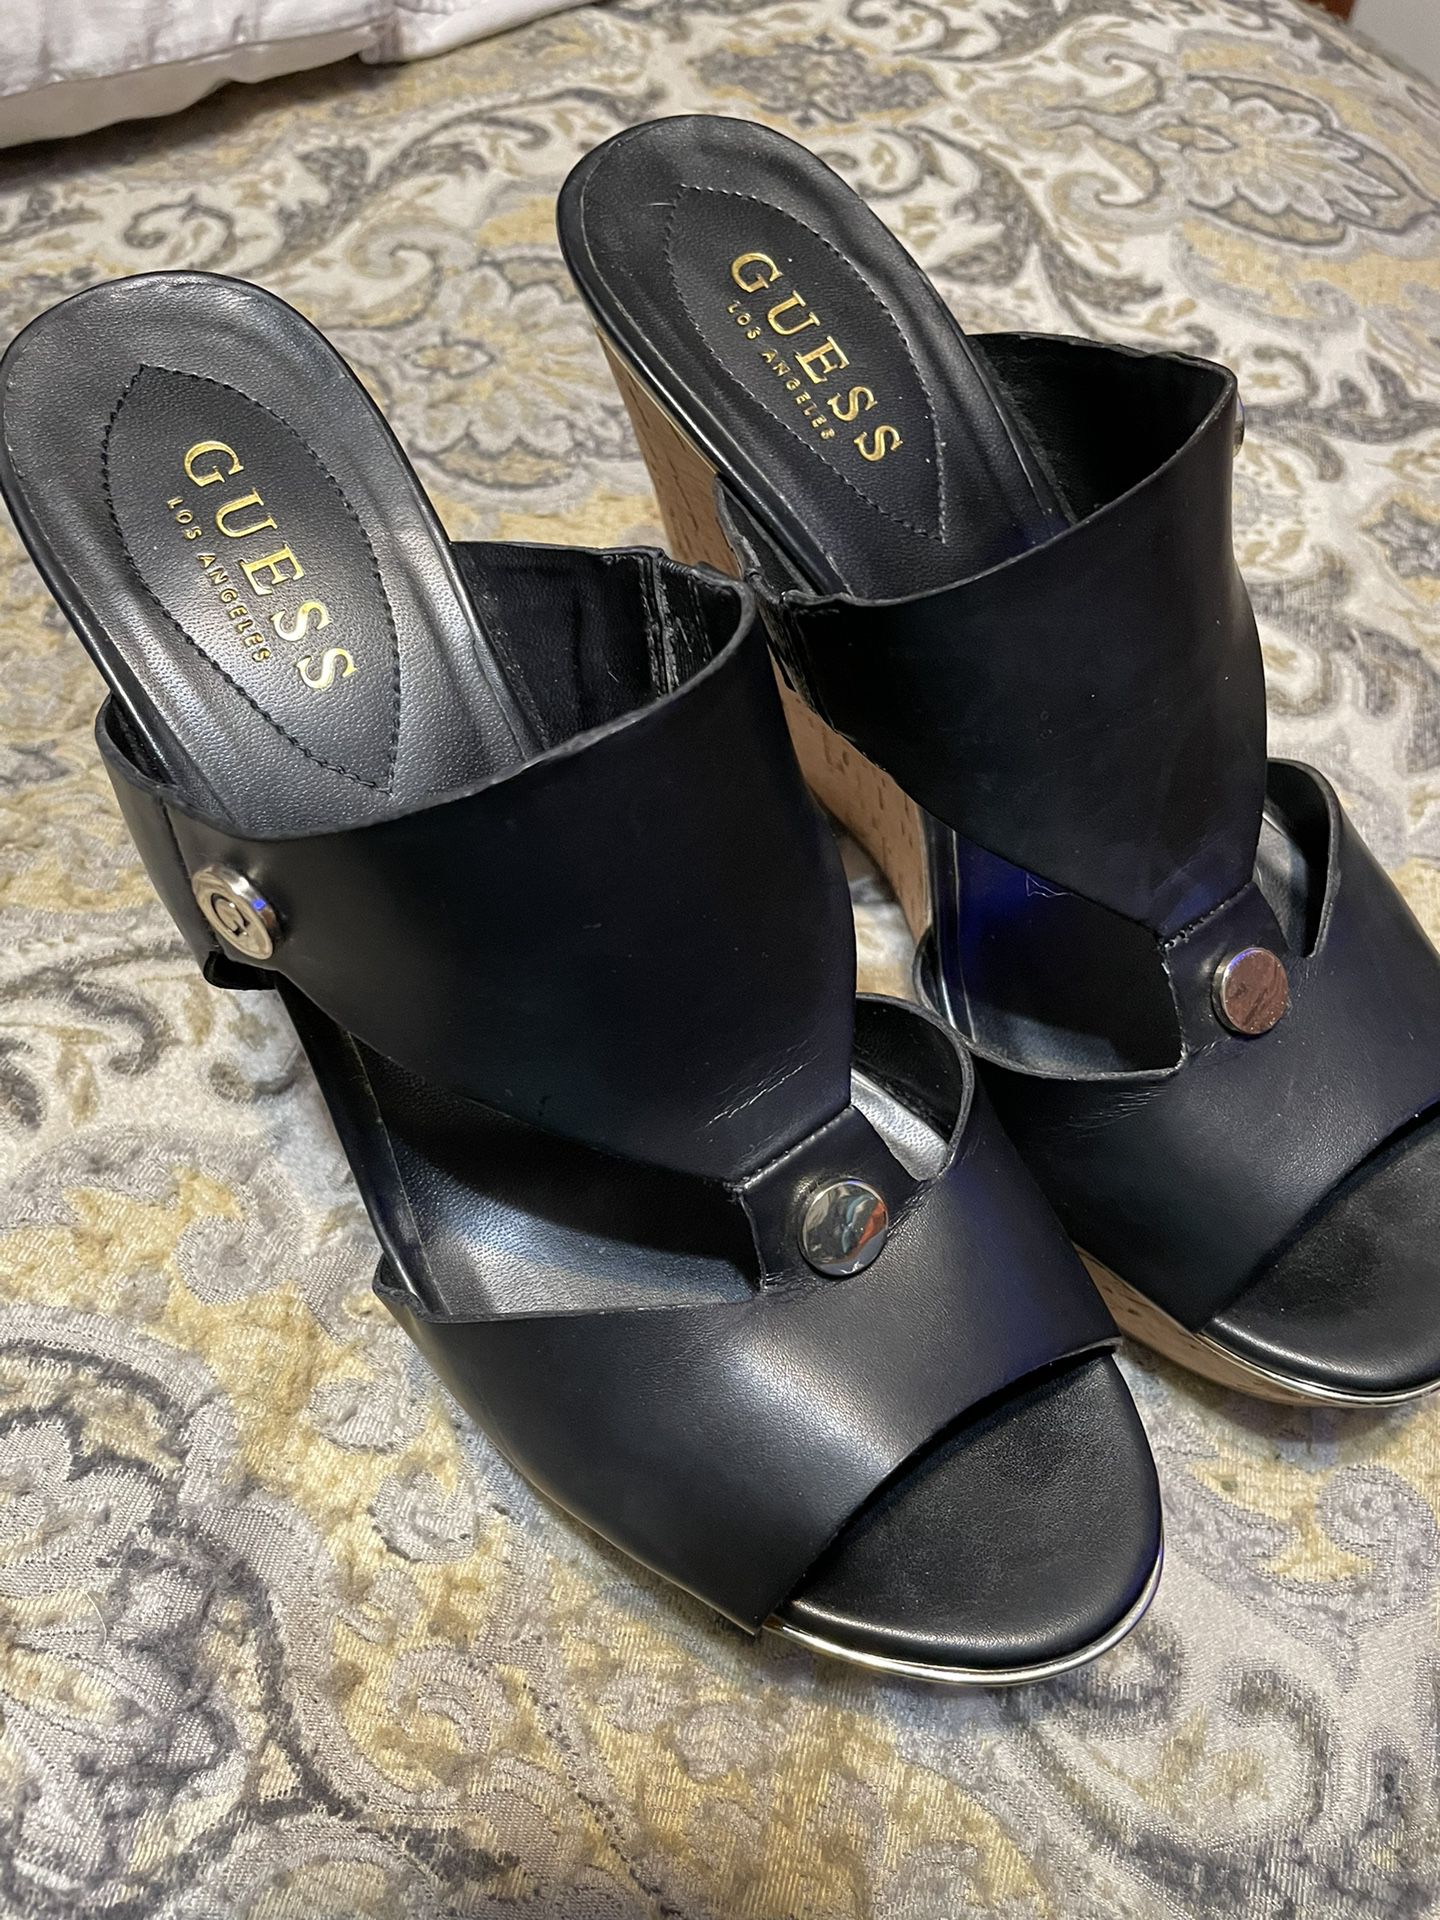 Womens Size 9 GUESS Wedge Sandals